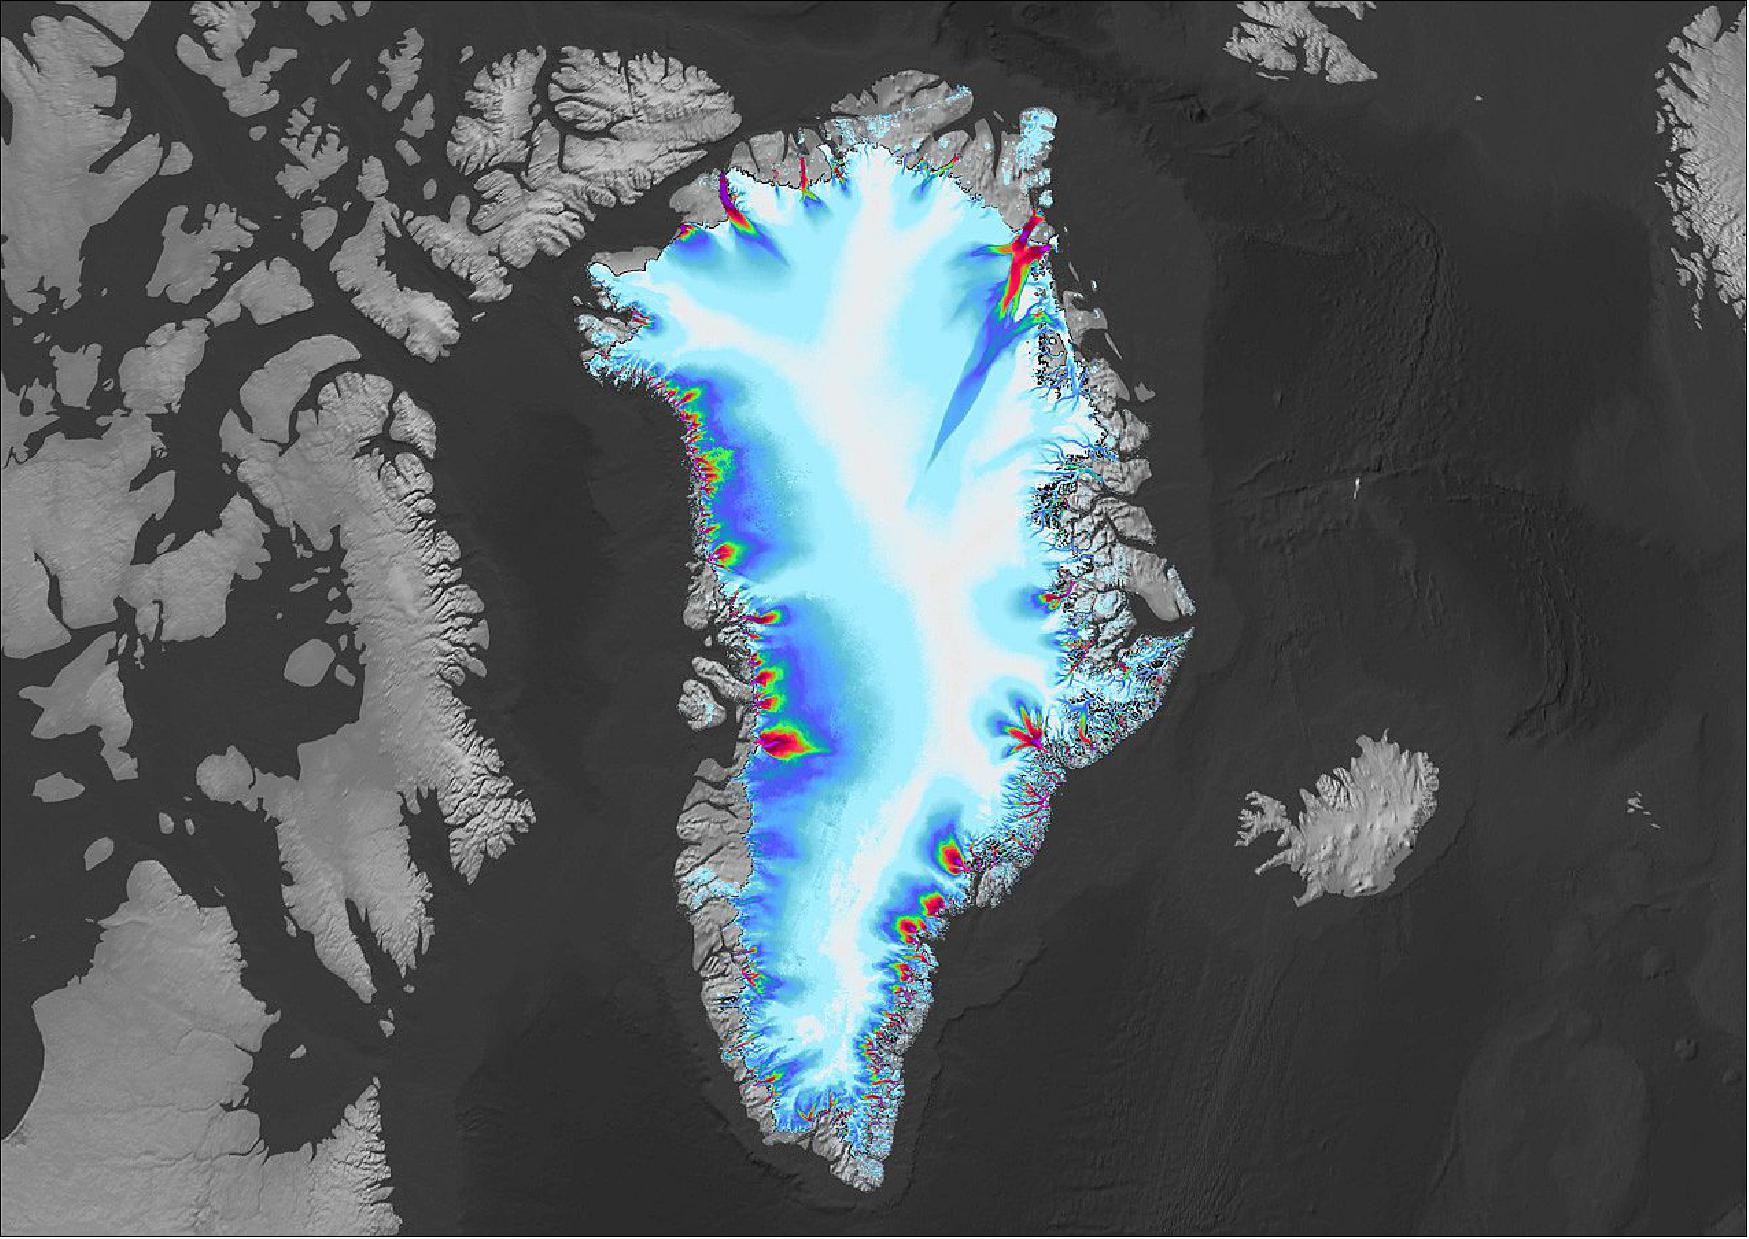 Figure 56: Greenland appears in this image created using data from the ITS_LIVE project, hosted at NASA's Jet Propulsion Laboratory. The coloring around the coast of the arctic island shows the speed of outlet glaciers flowing into the ocean (image credit: NASA/JPL-Caltech/USGS)